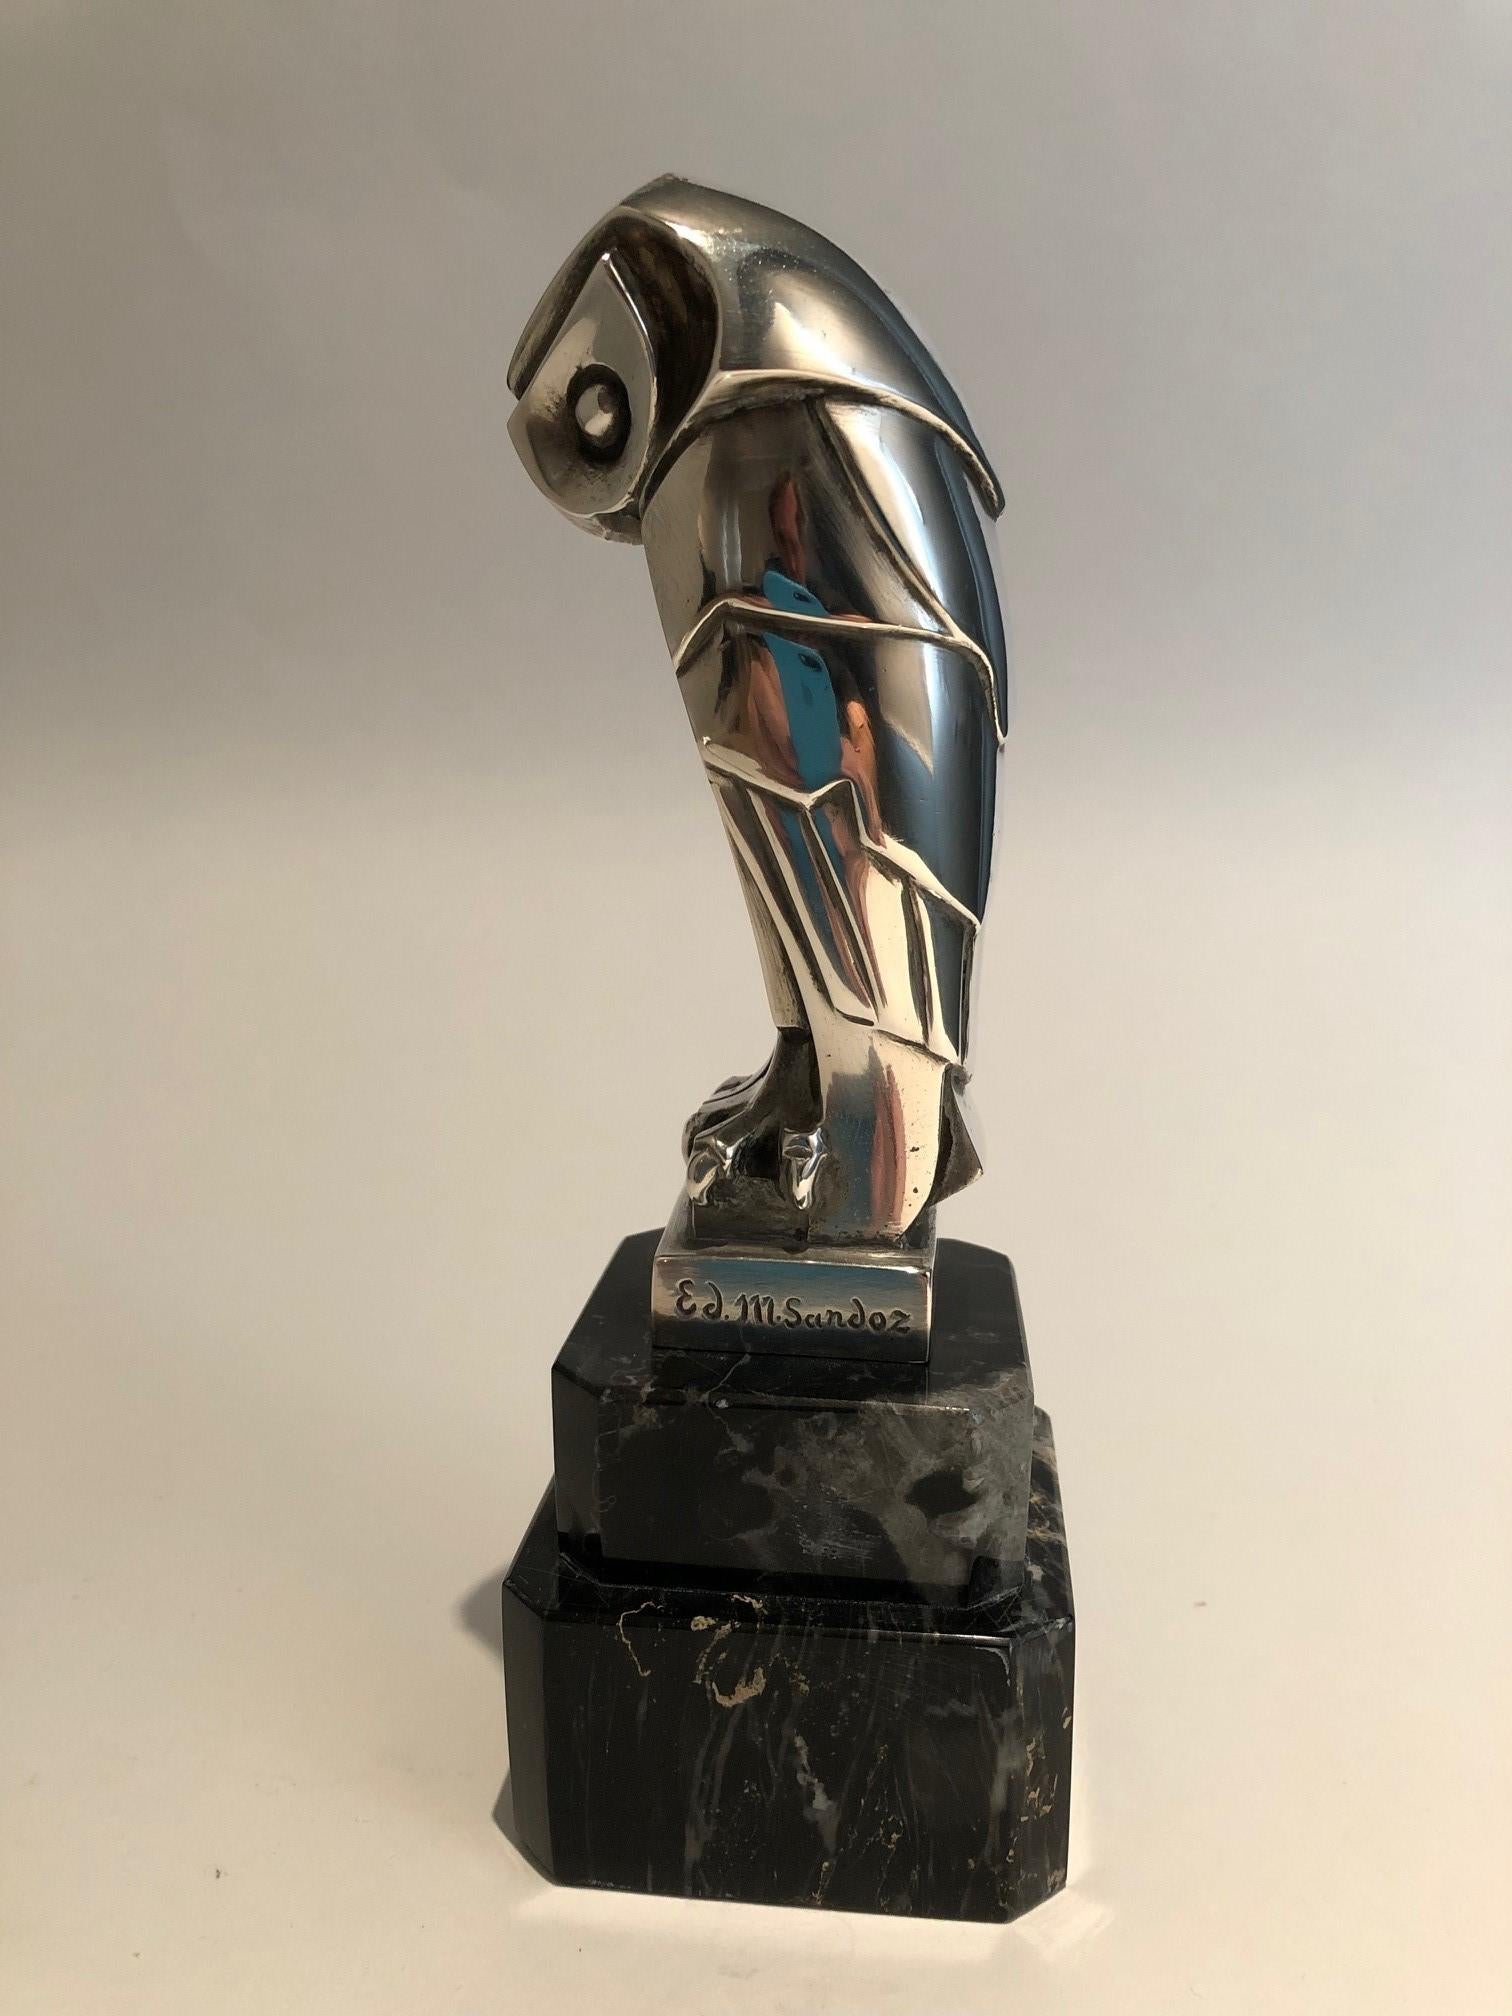 Art Deco, Cubist Edouard-Marcel Sandoz Owl - Hibou Bronze Car Mascot - Mascotte Automobile - Automobilia
Can be used as a desk paperweight. Very Nice looking.
Sandoz (1881-1971) is one of the foremost sculptors and designers of the 20th century.